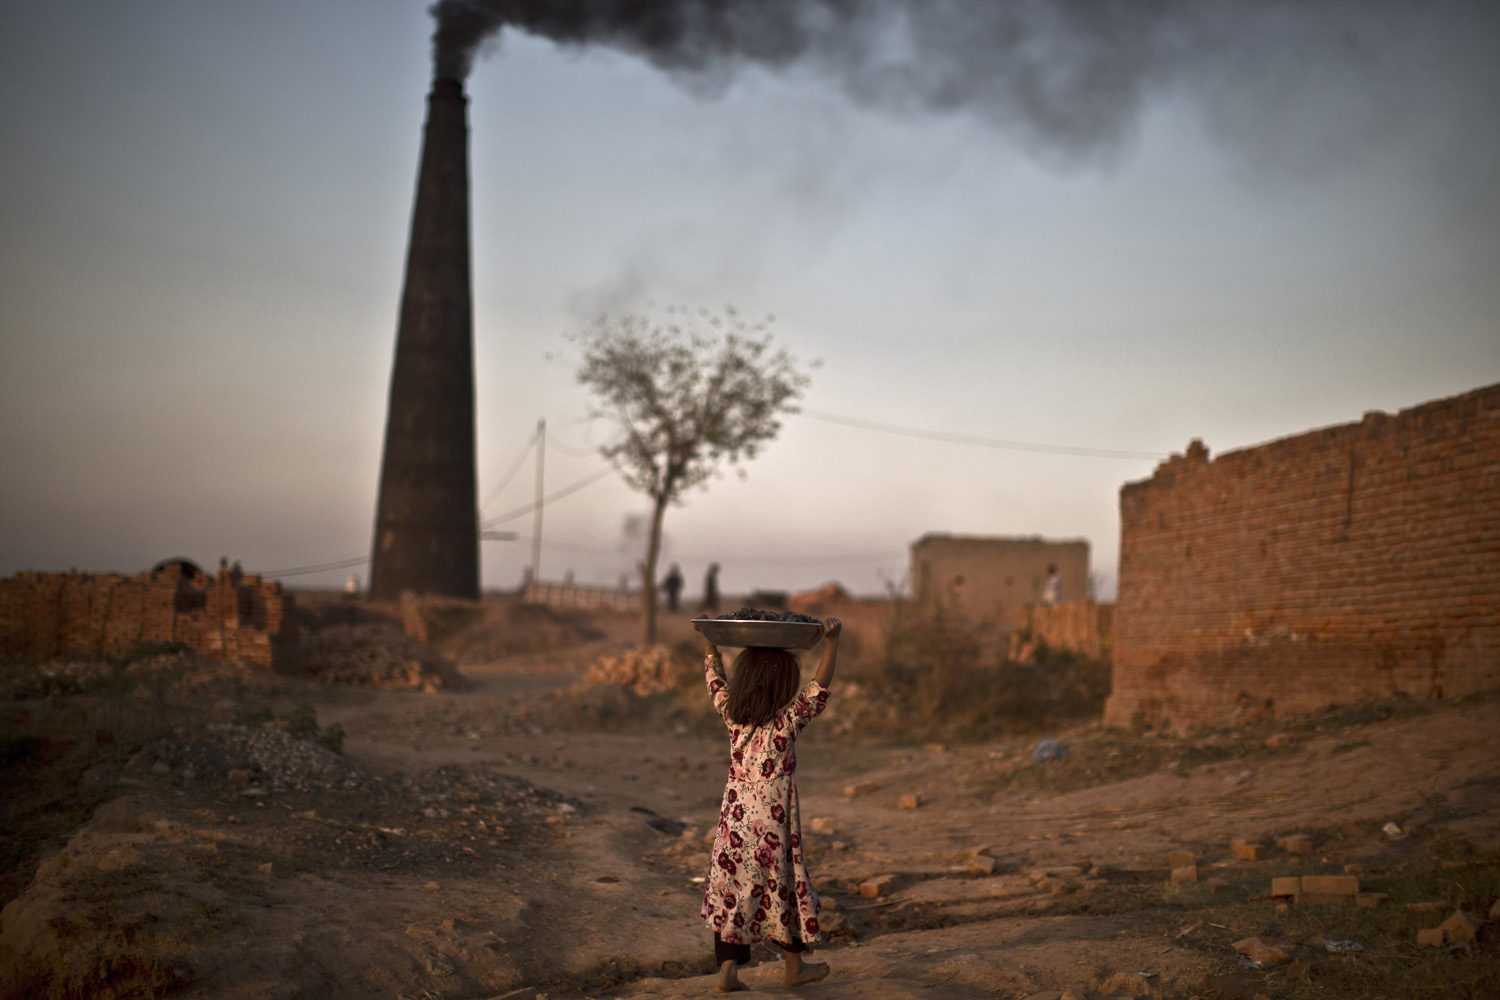 Nov. 21, 2013. Following her daily work with her parents at a brick factory, Pakistani Nagina Mohammed, 7, walks back to her home carrying coal over her head, that she collected to be used for heating and cooking, on the outskirts of Islamabad.